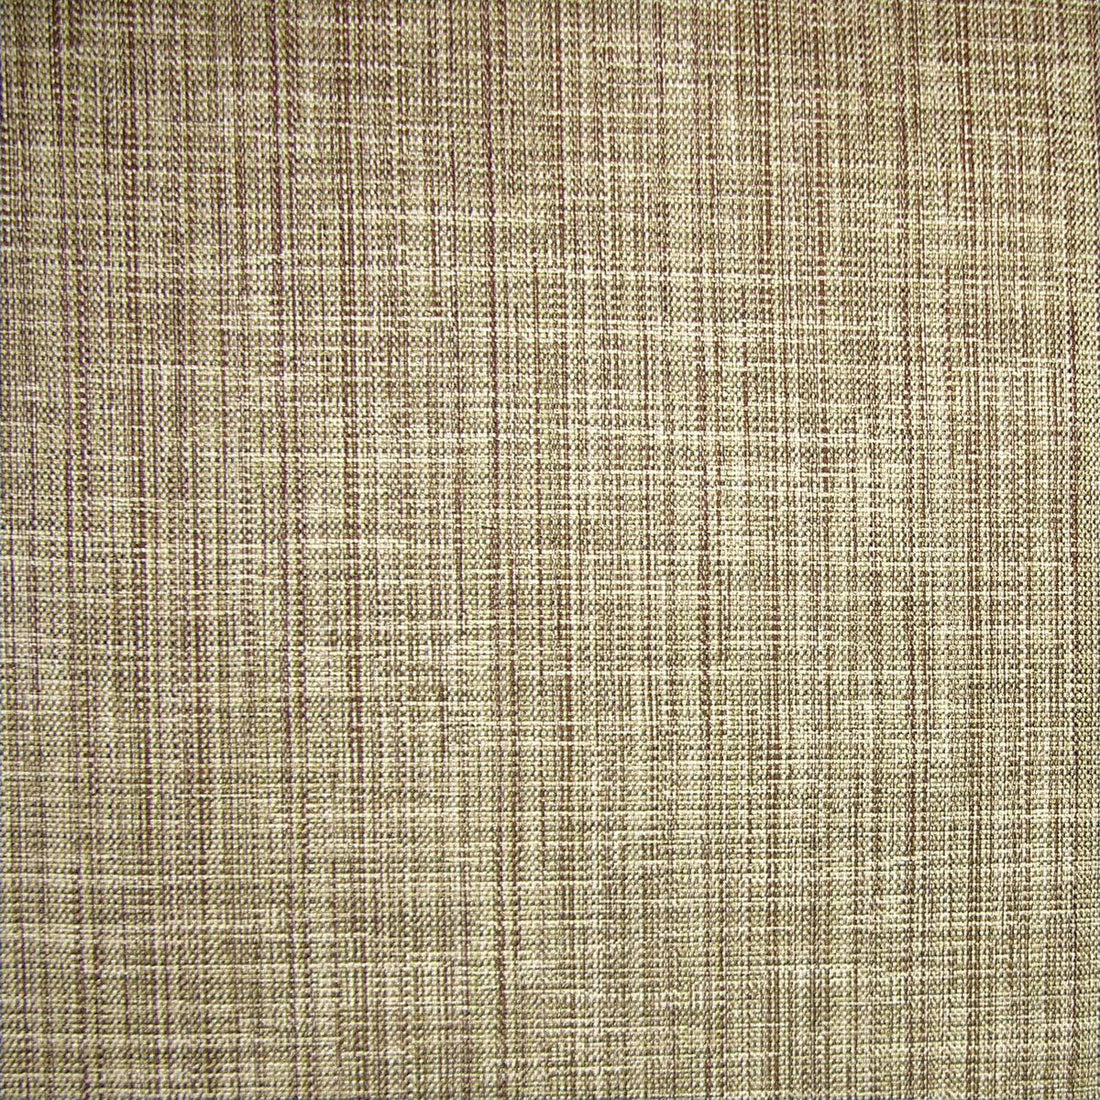 Lacerta Tweed fabric in chartreuse brown color - pattern number AL 00231992 - by Scalamandre in the Old World Weavers collection